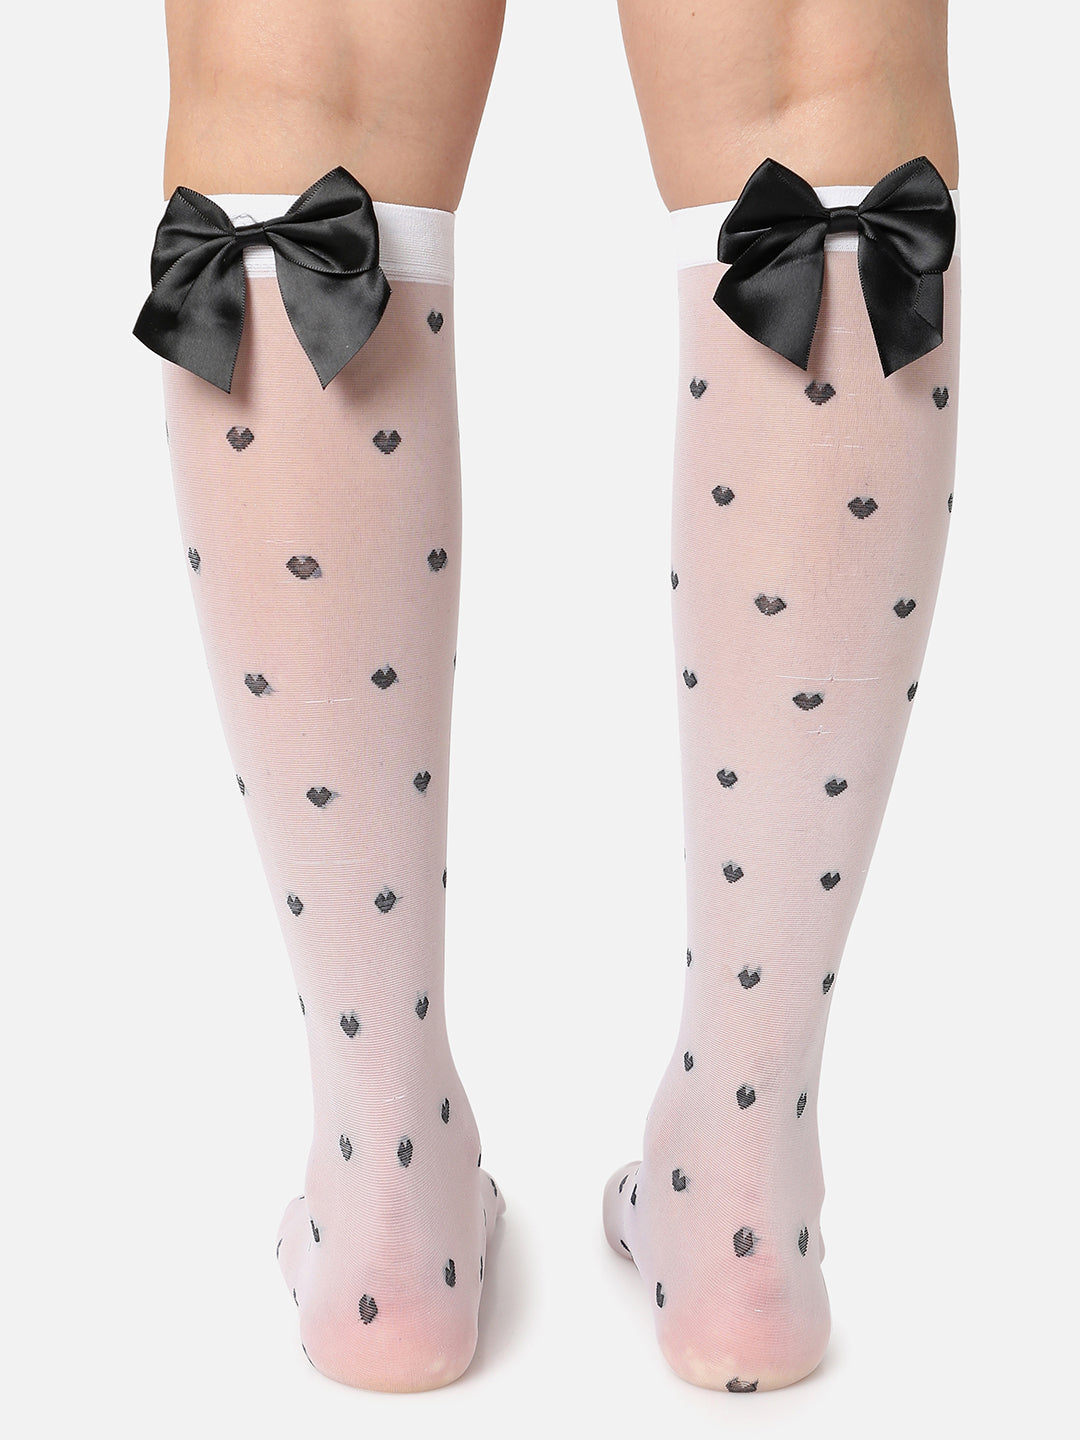 White Knee High Stockings With Bow